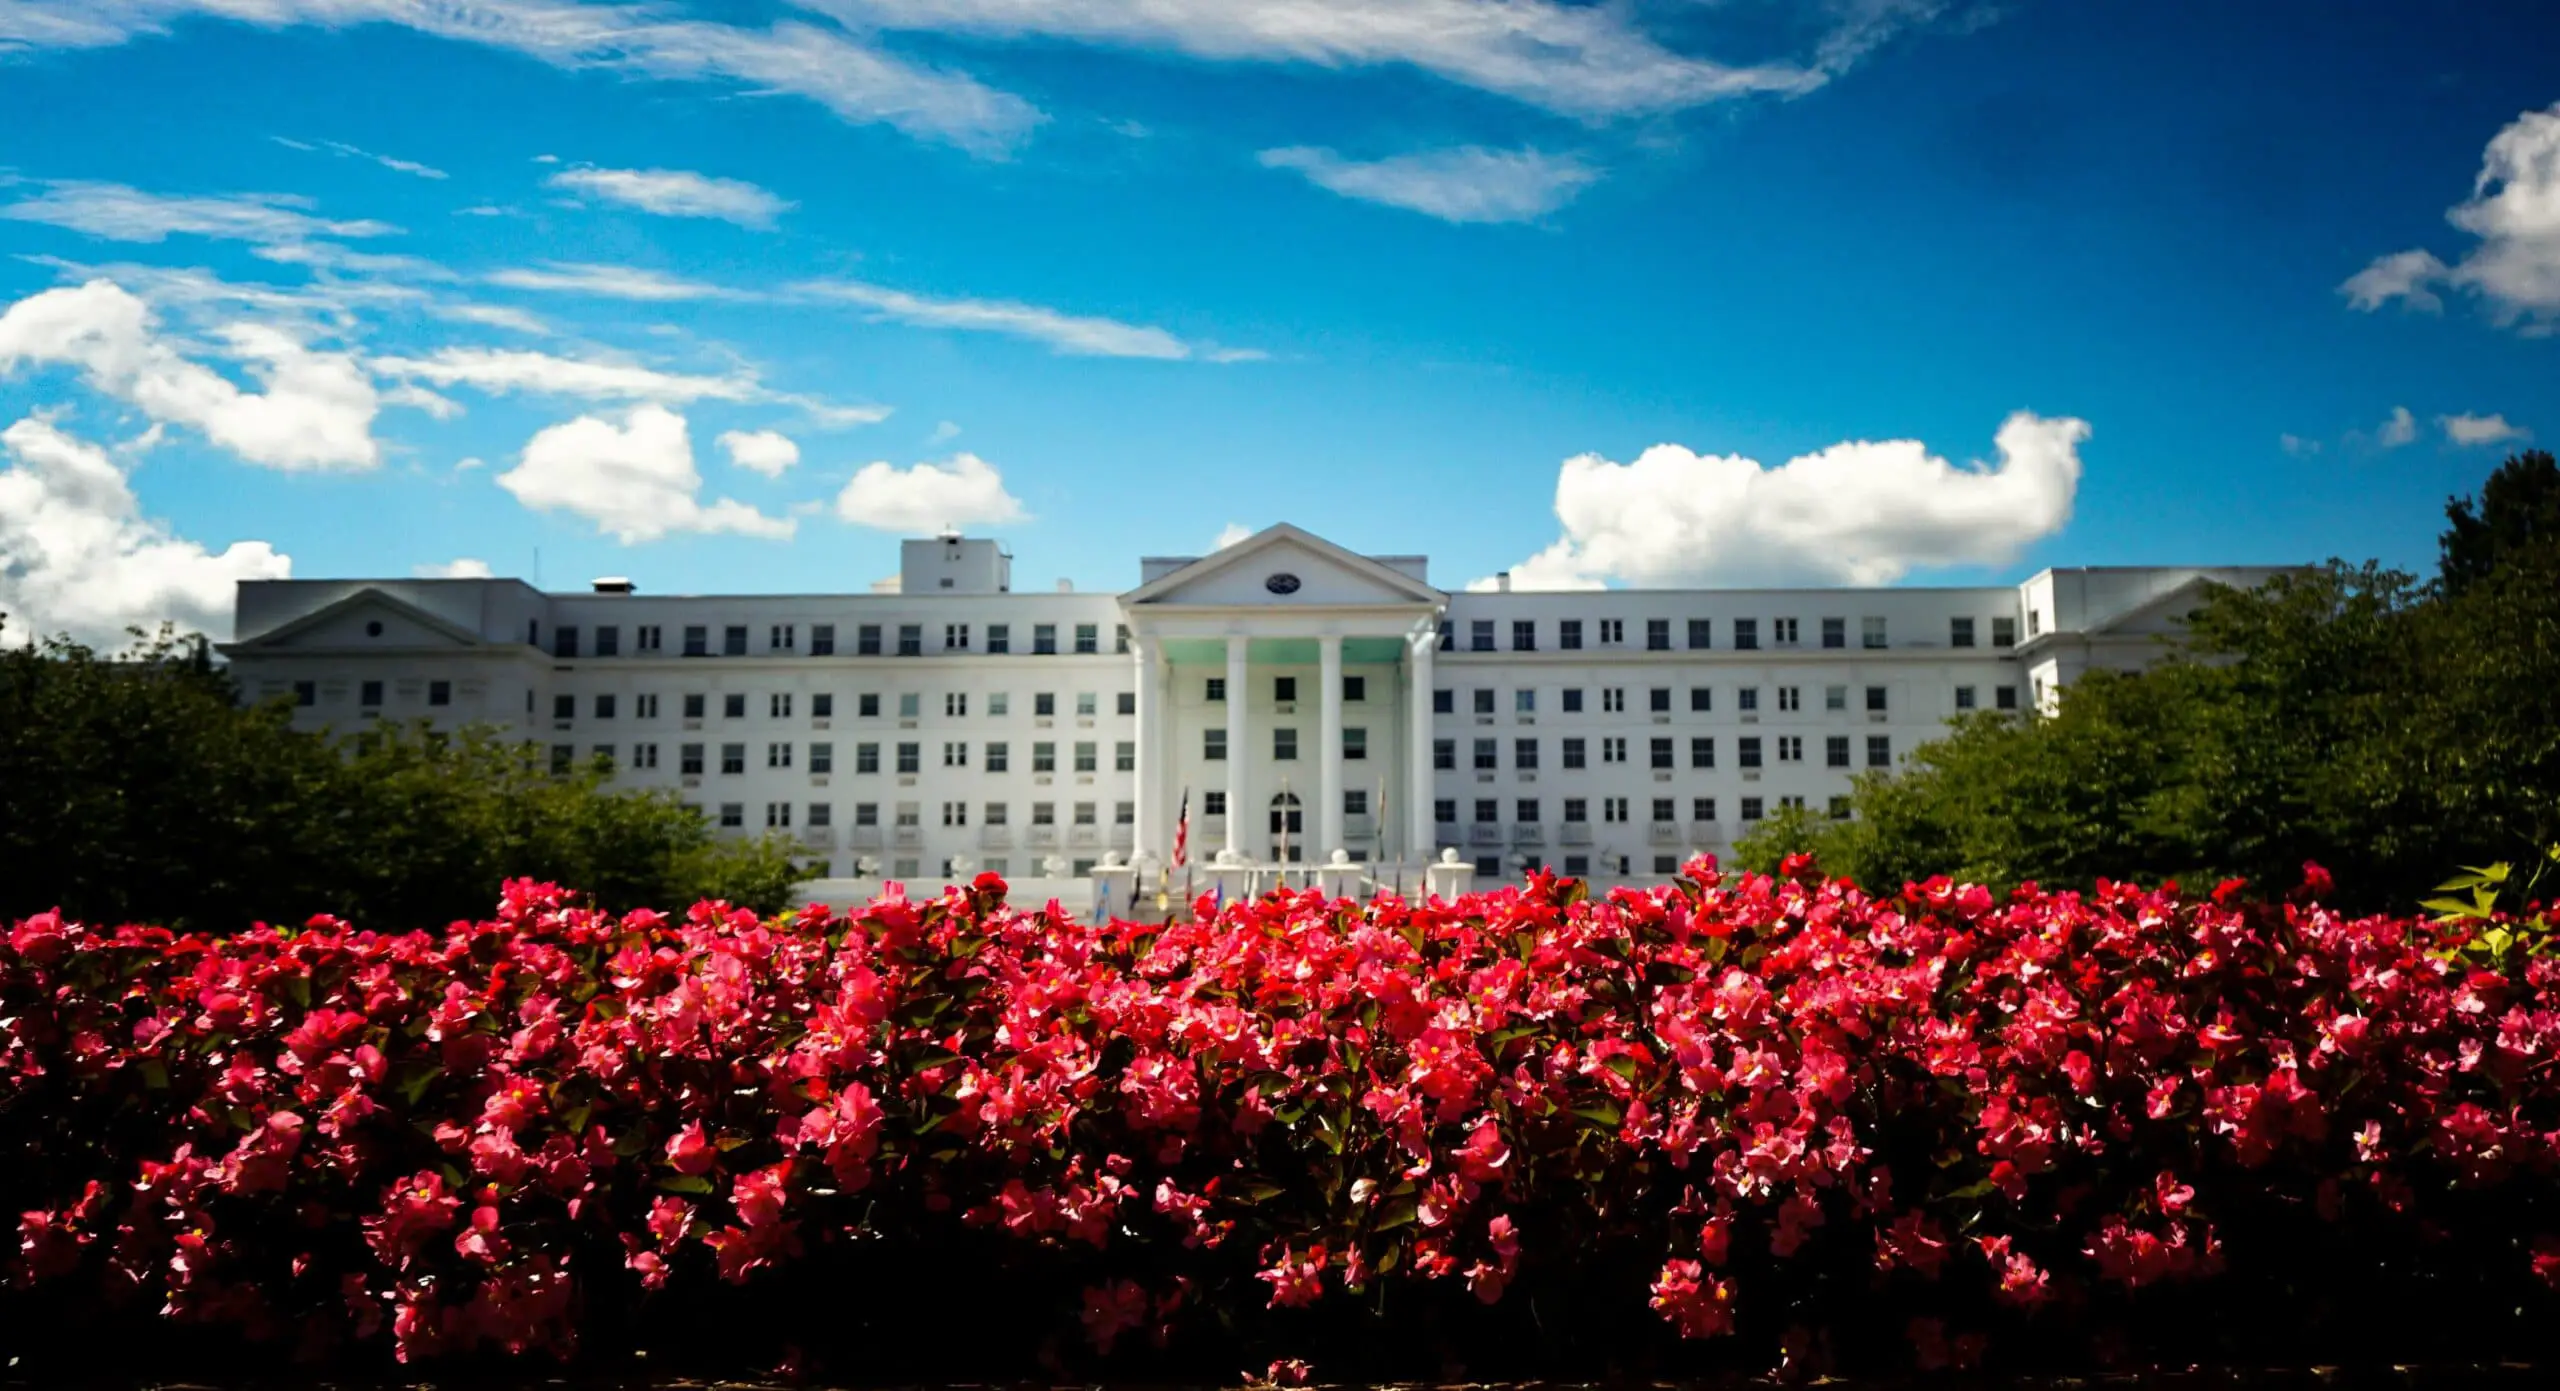 The Greenbrier